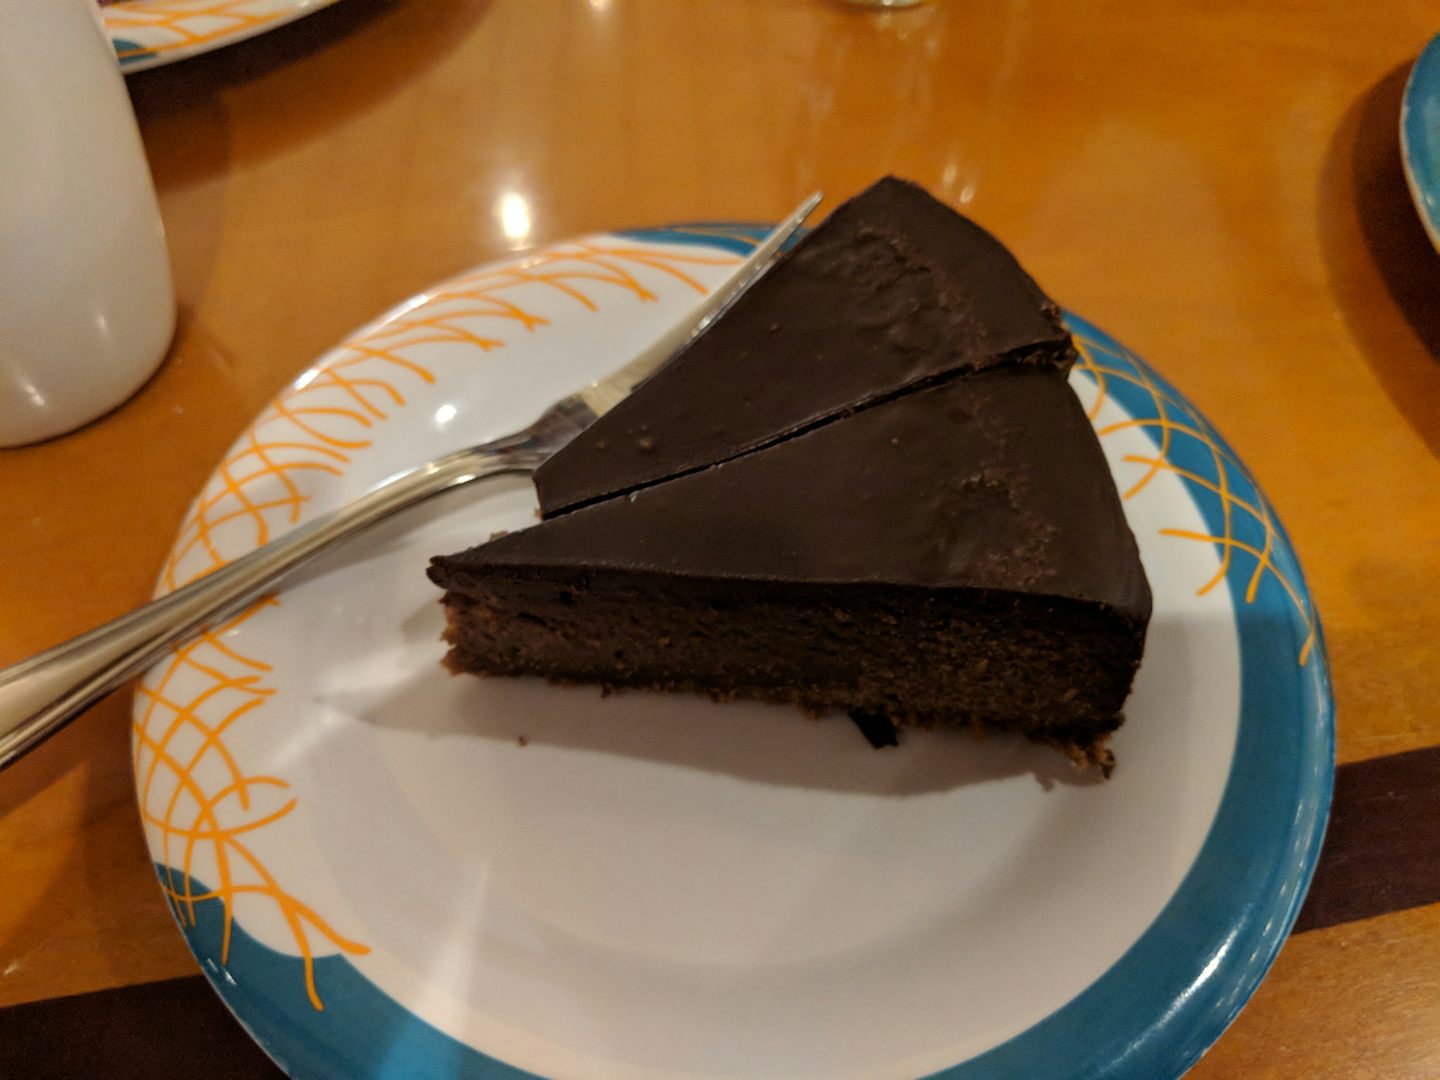 Gluten free special for me! Ask and you shall receive. The windjammer chef gave me my very own cheesecake every night. And my son only eats pizza guess what he got? Pizza